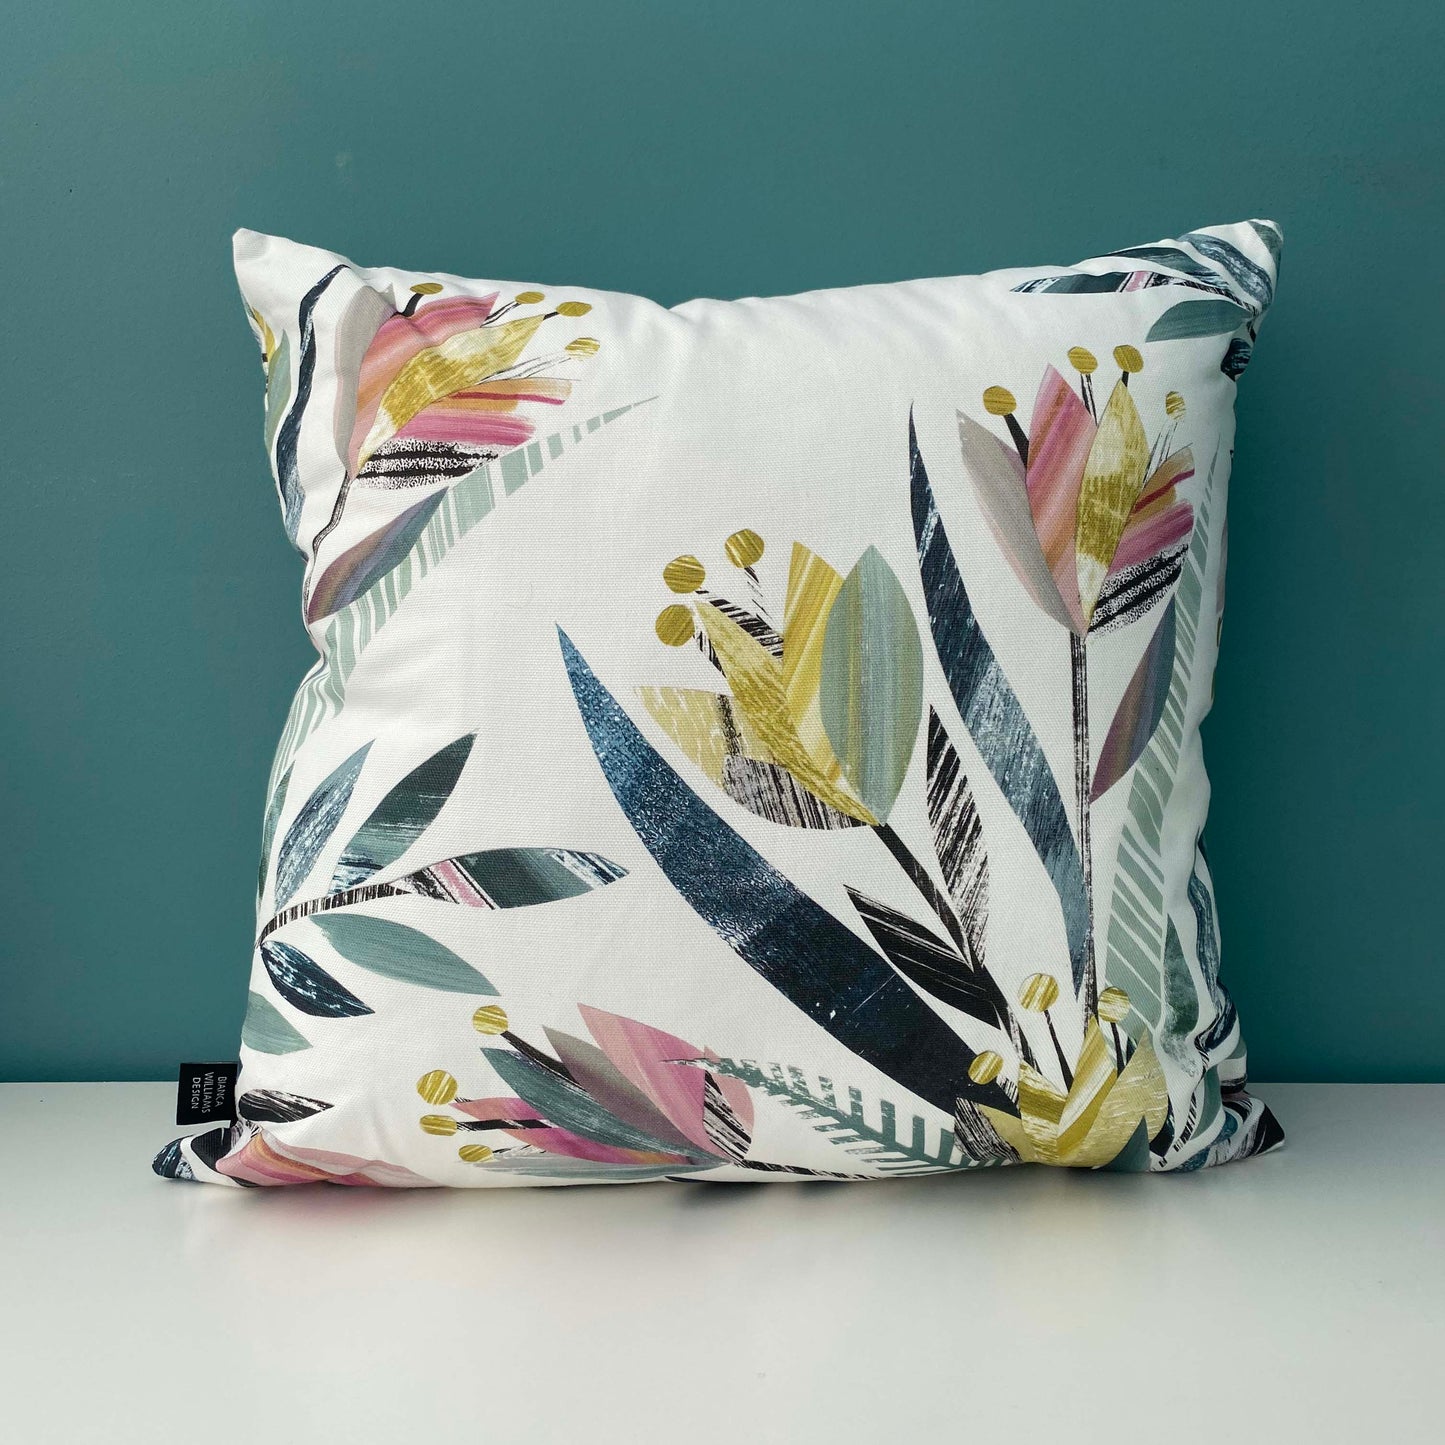 A Square Tulip Cushion featuring a textured tulip pattern in Pink, yellows, greens and grey on a white background has been placed on a white shelf against a blue/green wall.